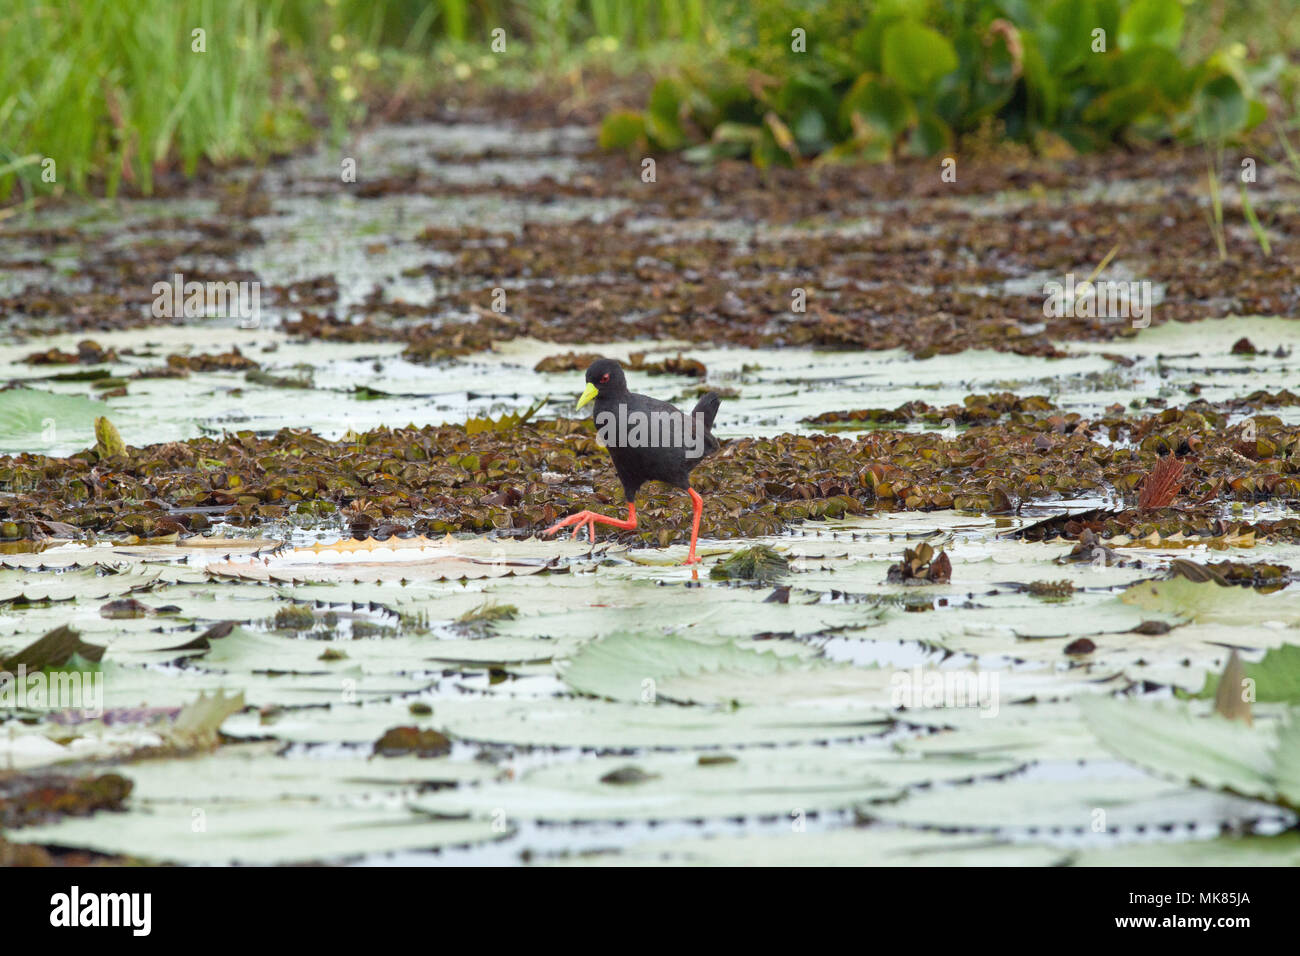 Black Crake (Zapornia flavirostra). Long legs and toes being used to stride across water surface using waterlily leaves (Nymphaea nouchali),  as stepp Stock Photo